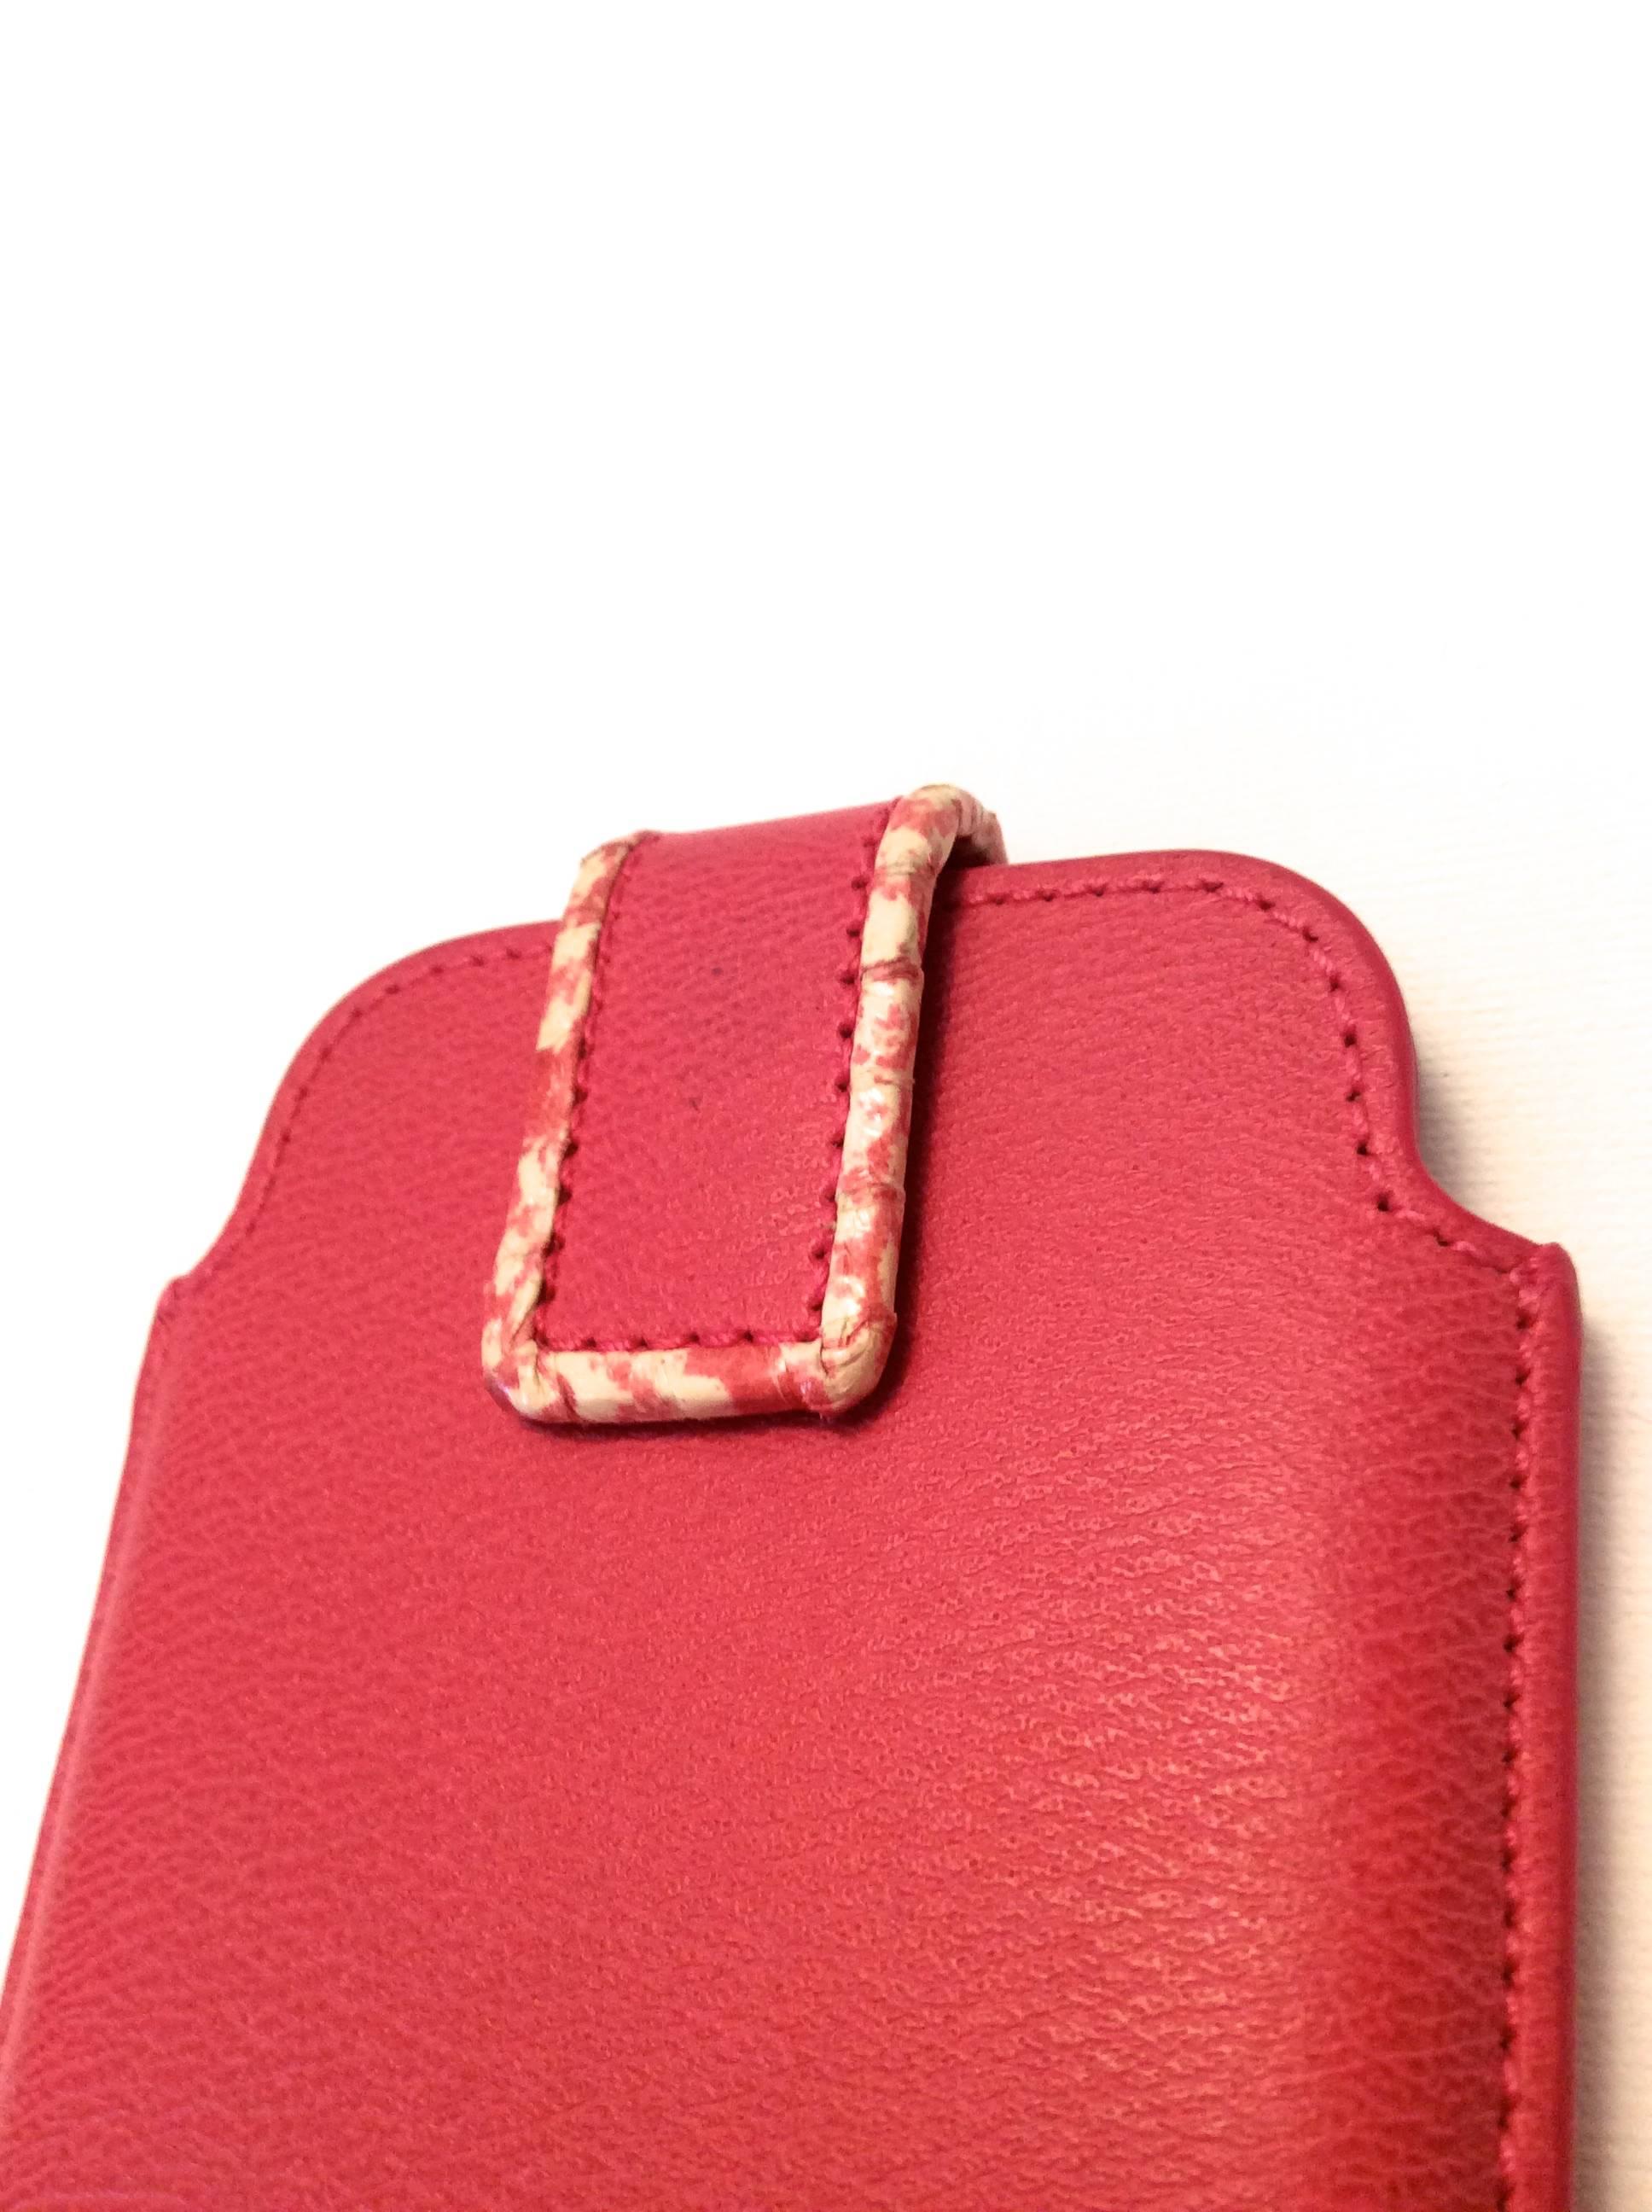 Smythson Pink Cell Phone / Card Holder In New Condition For Sale In Boca Raton, FL